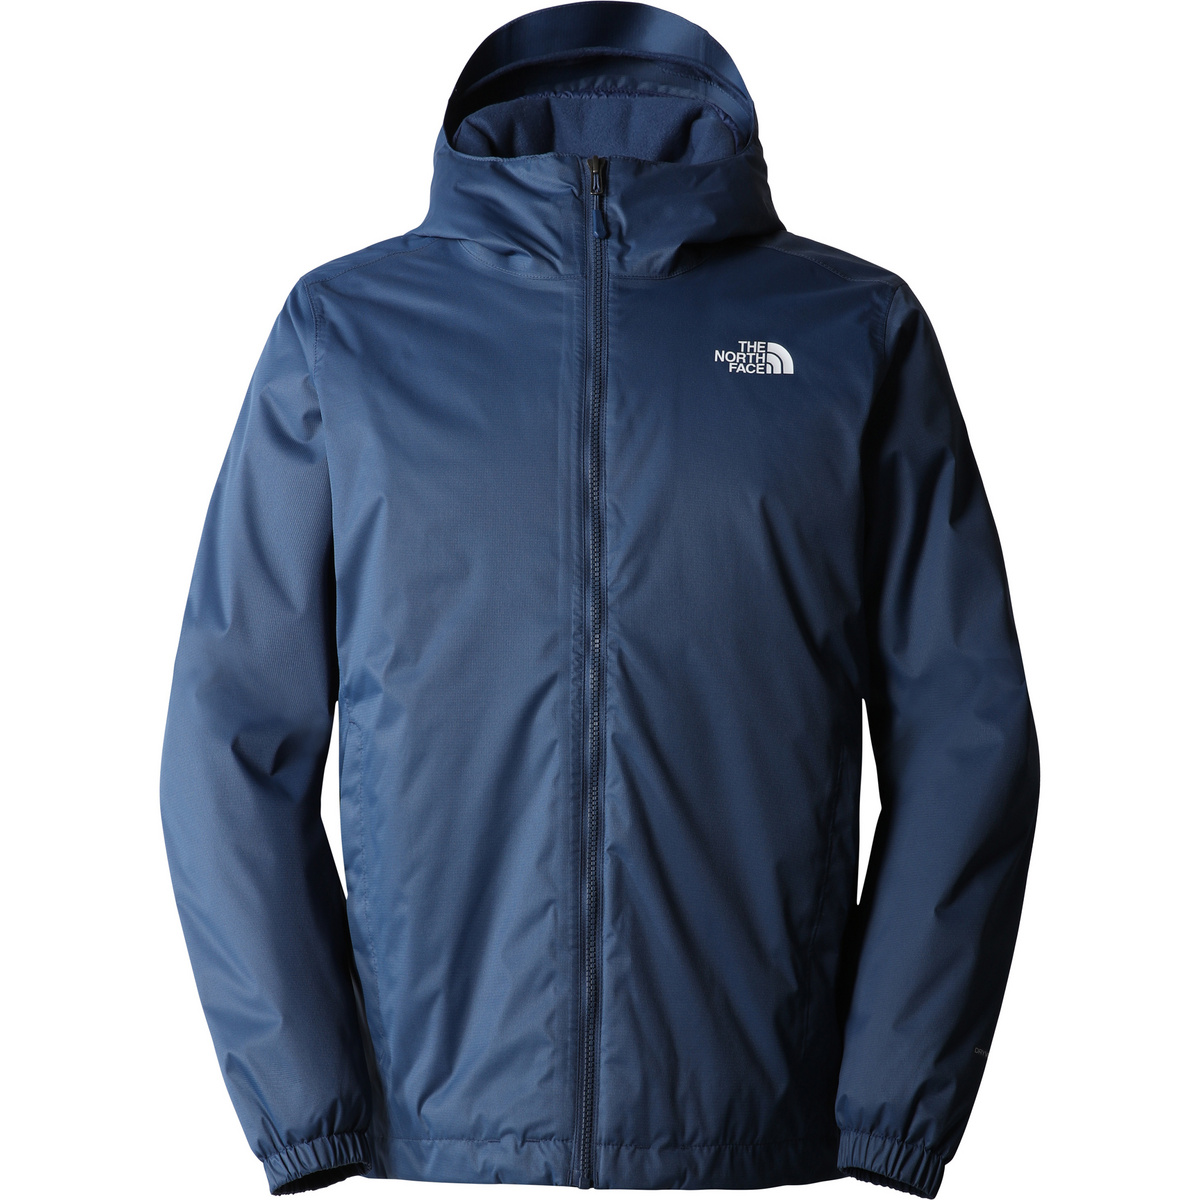 The North Face Herren Quest Insulated Jacke von The North Face